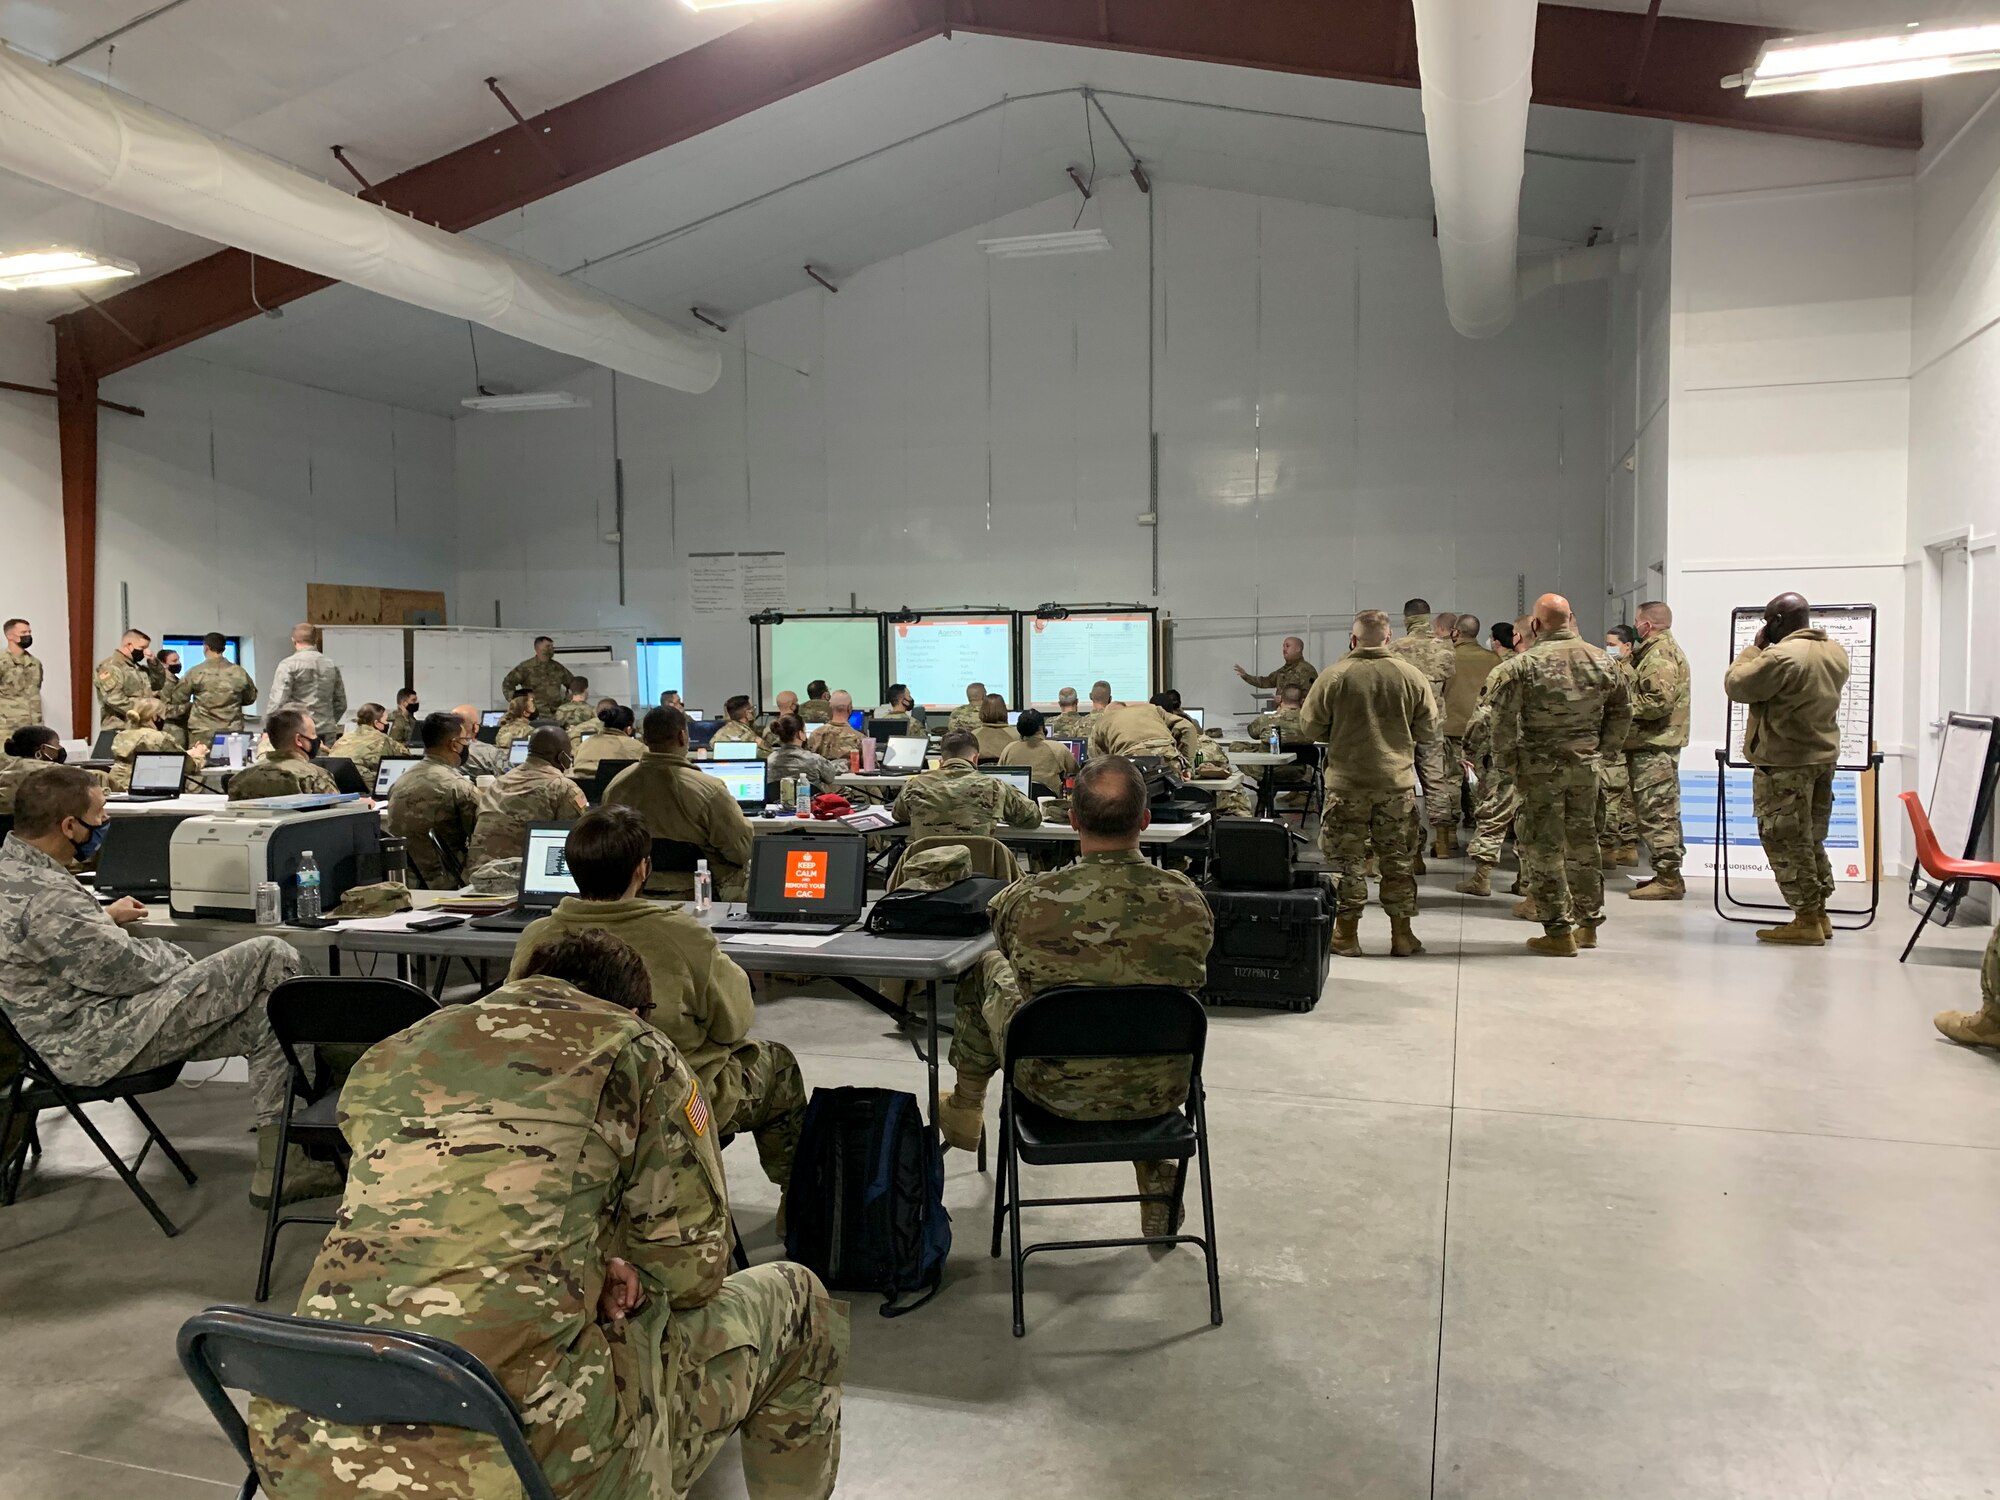 MEOCs around the nation were activated in the event operations tempos at the inauguration were elevated for National Guard troops in the D.C. area.